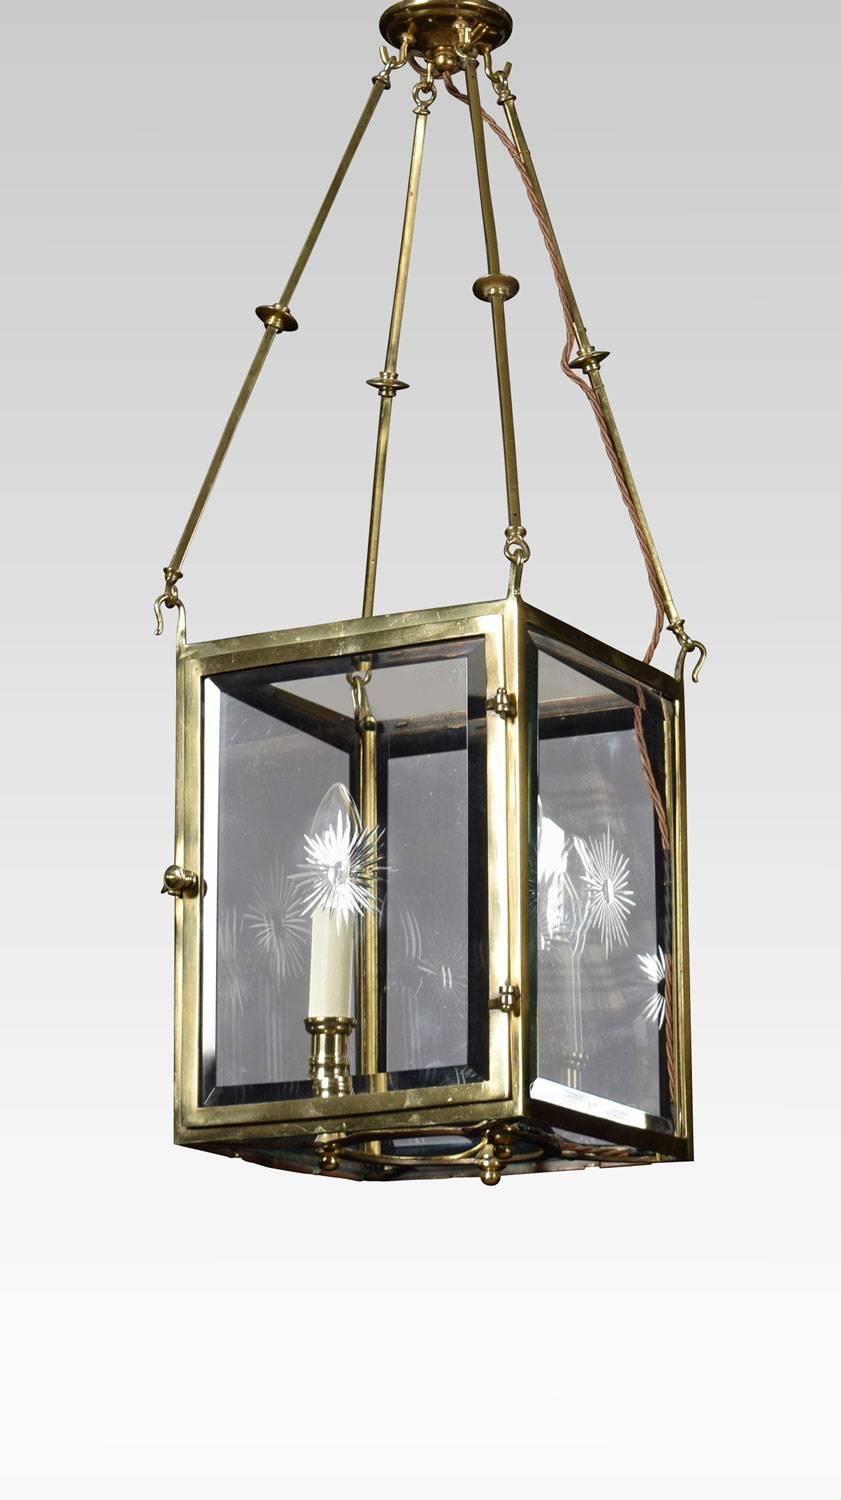 A set of three gilt brass square section hall lanterns, fitted with three lights enclosed by cut glass panels.
Dimensions:
Height 29.5 inches
Width 10 inches
Depth 10 inches.